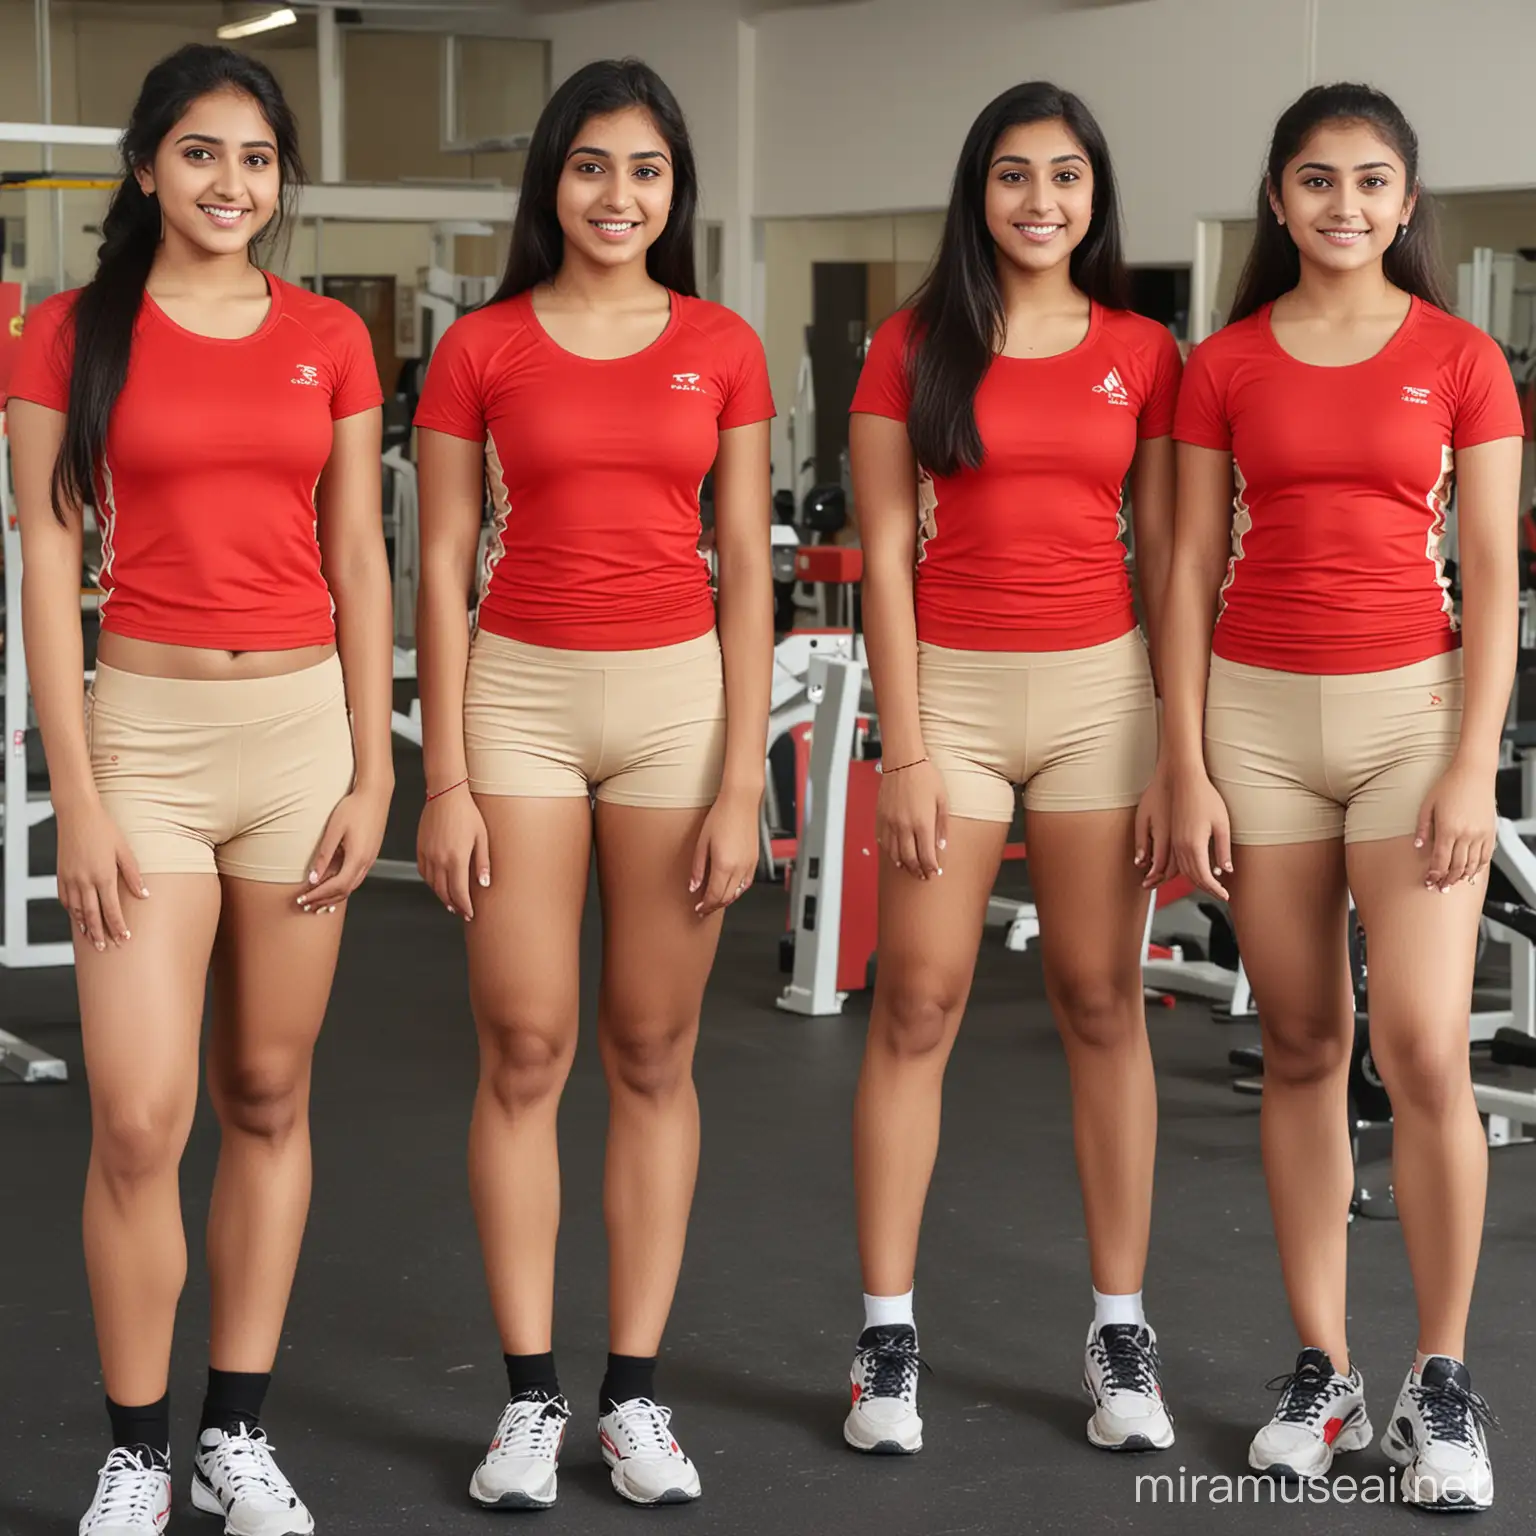 Indian Grade 11 Girls in Red Camel Toe Shorts Gym Class